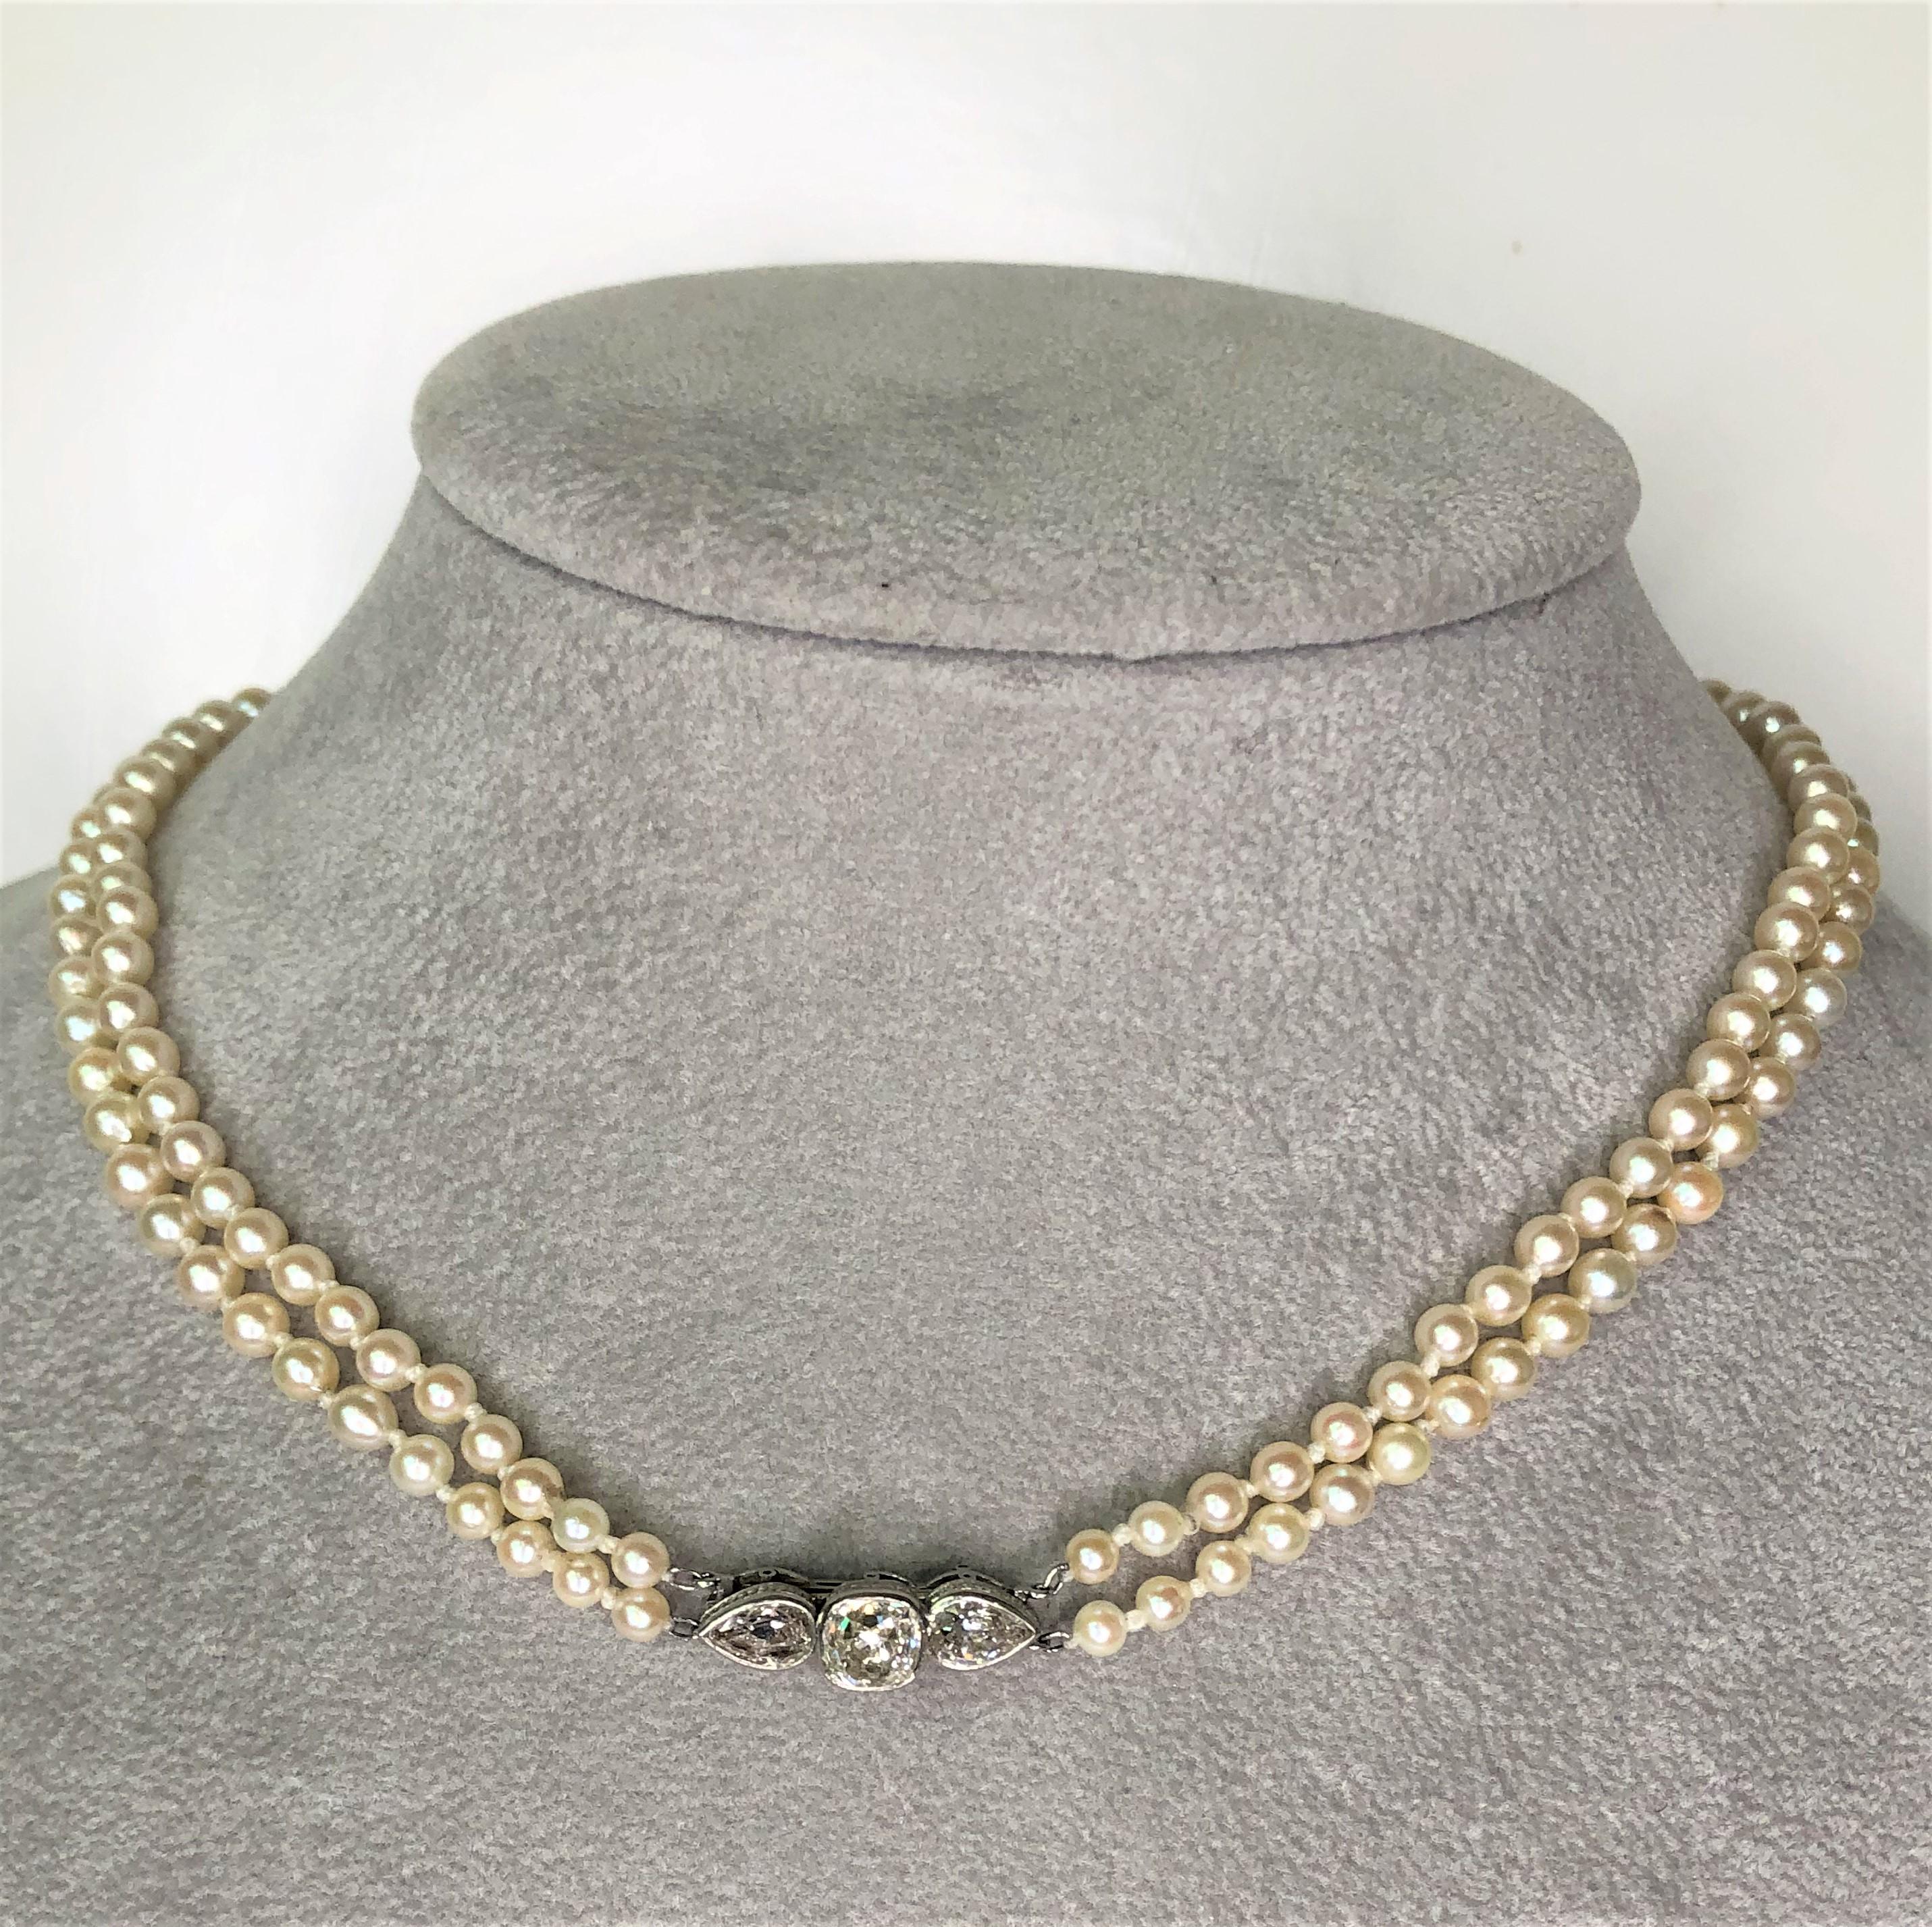 This amazing necklace is unique; with beautiful shiny diamonds and two strands of round pearls, it's a must have for anyone!
Two graduated, cultured pearl strands with diamond clasp, approximately 16 inches total length.
Knots between each